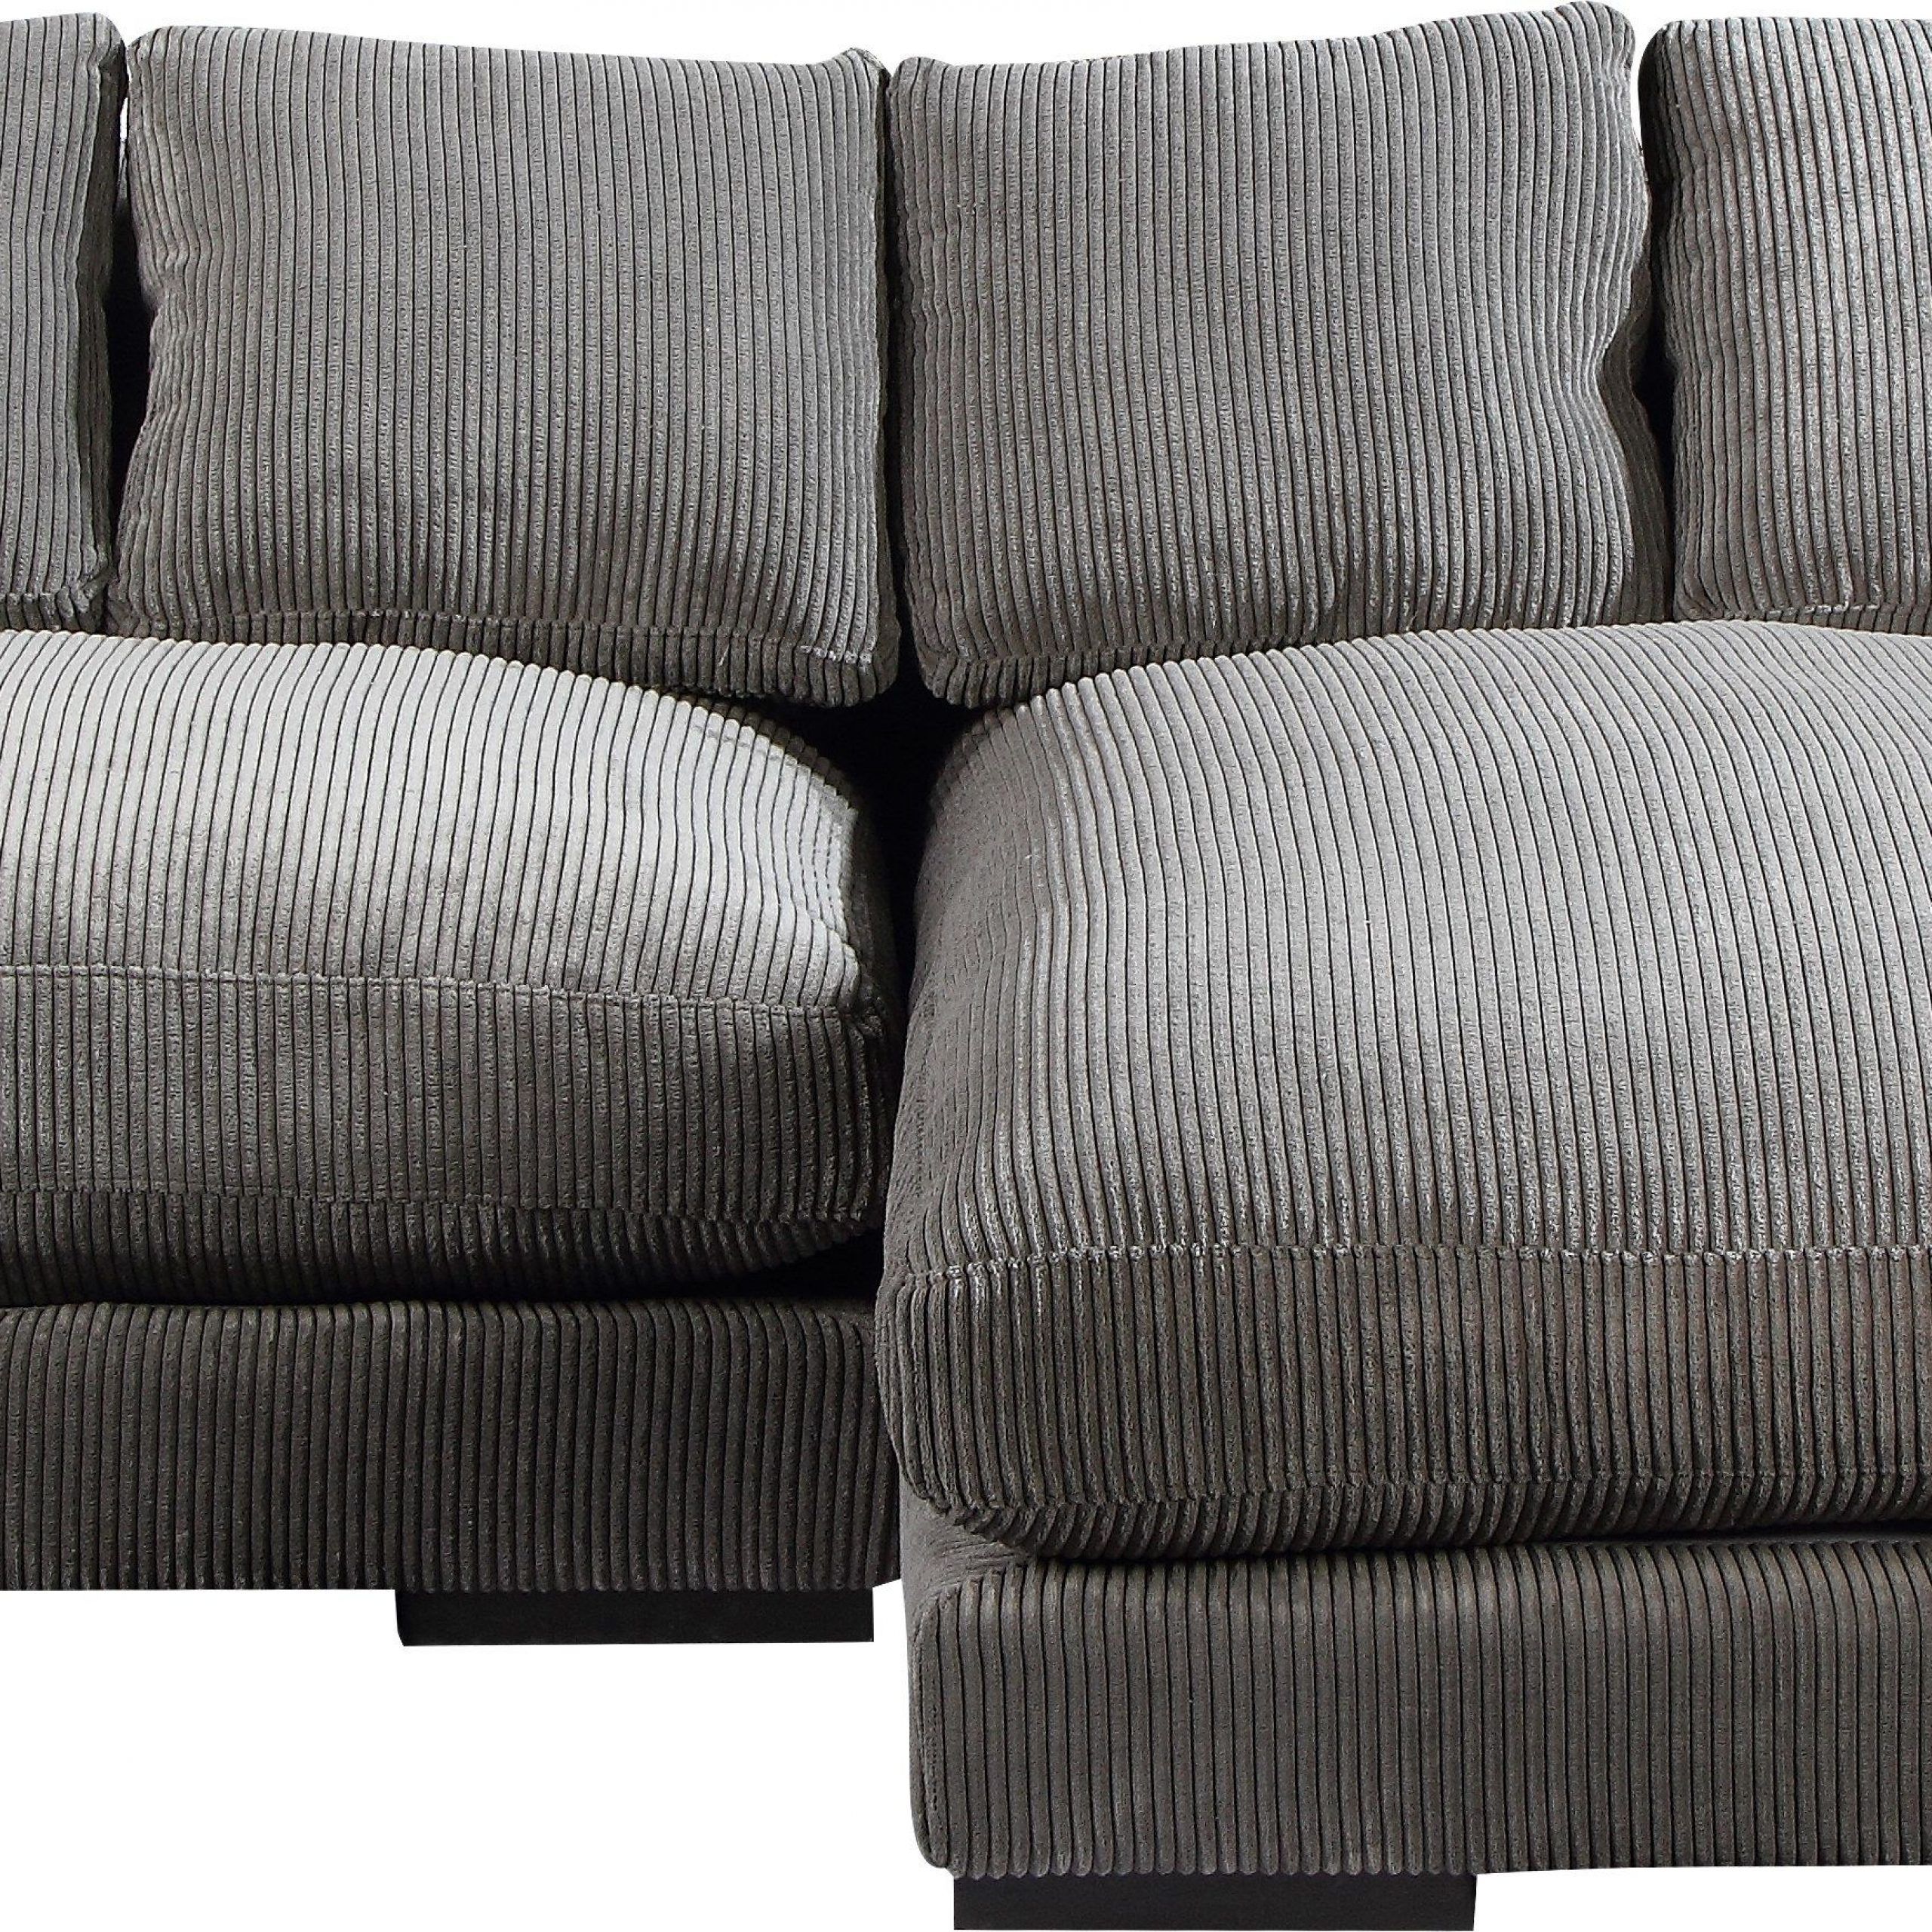 Sectional, Sectional Sofa Couch, Living Intended For Well Liked Scandinavia Wrapped Wool Cylinder Pouf Ottomans (View 9 of 10)